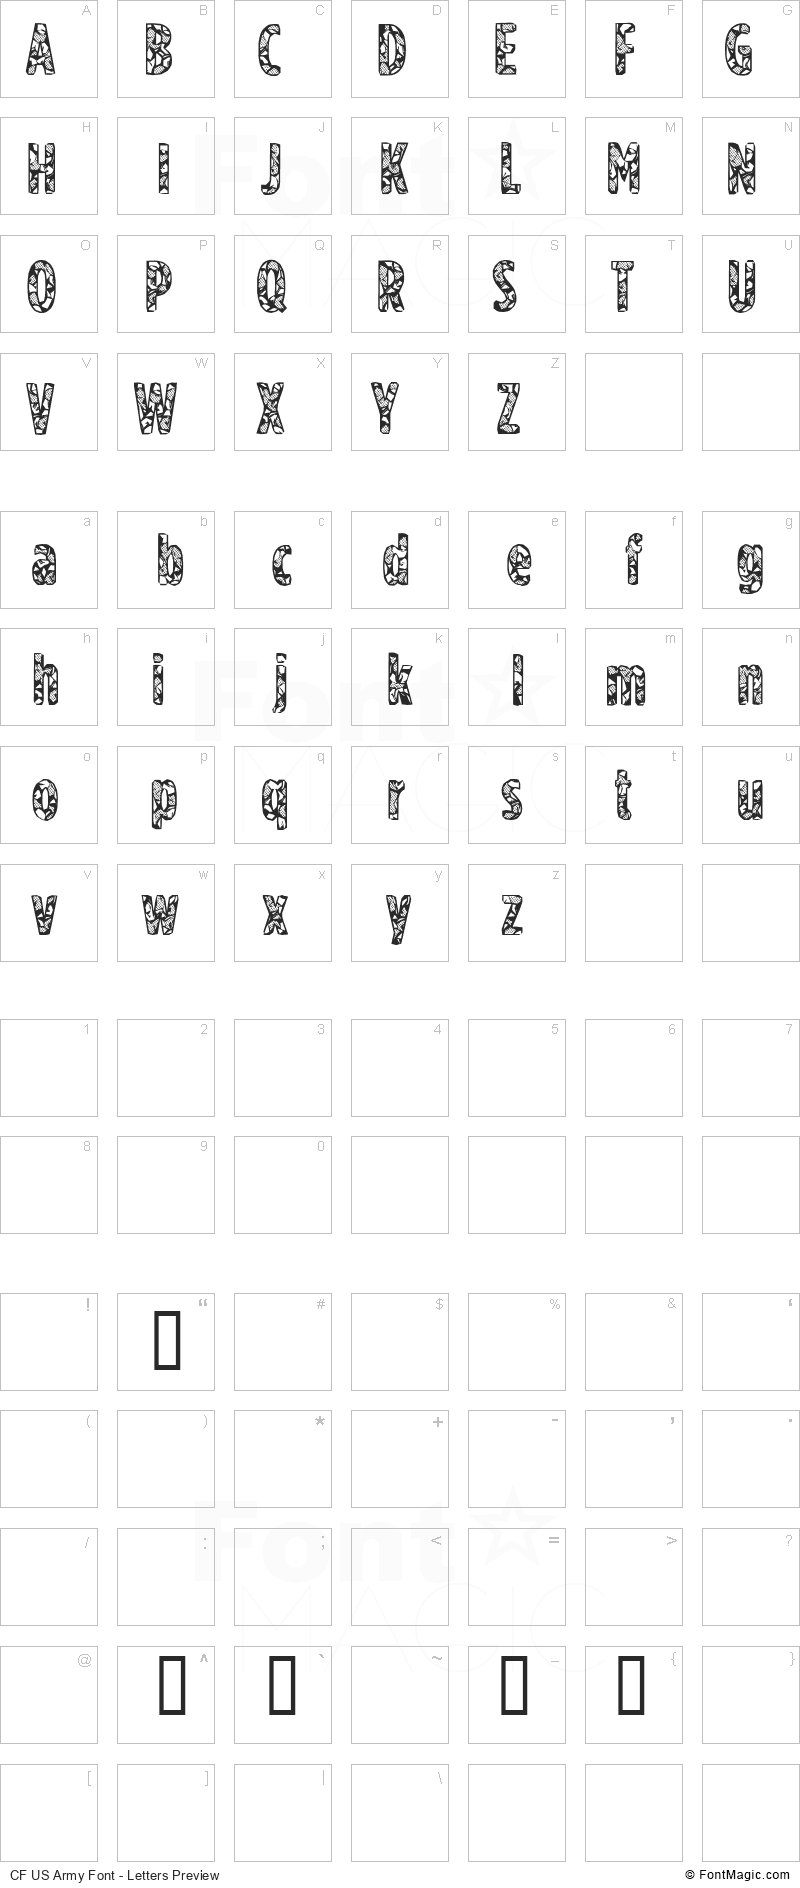 CF US Army Font - All Latters Preview Chart